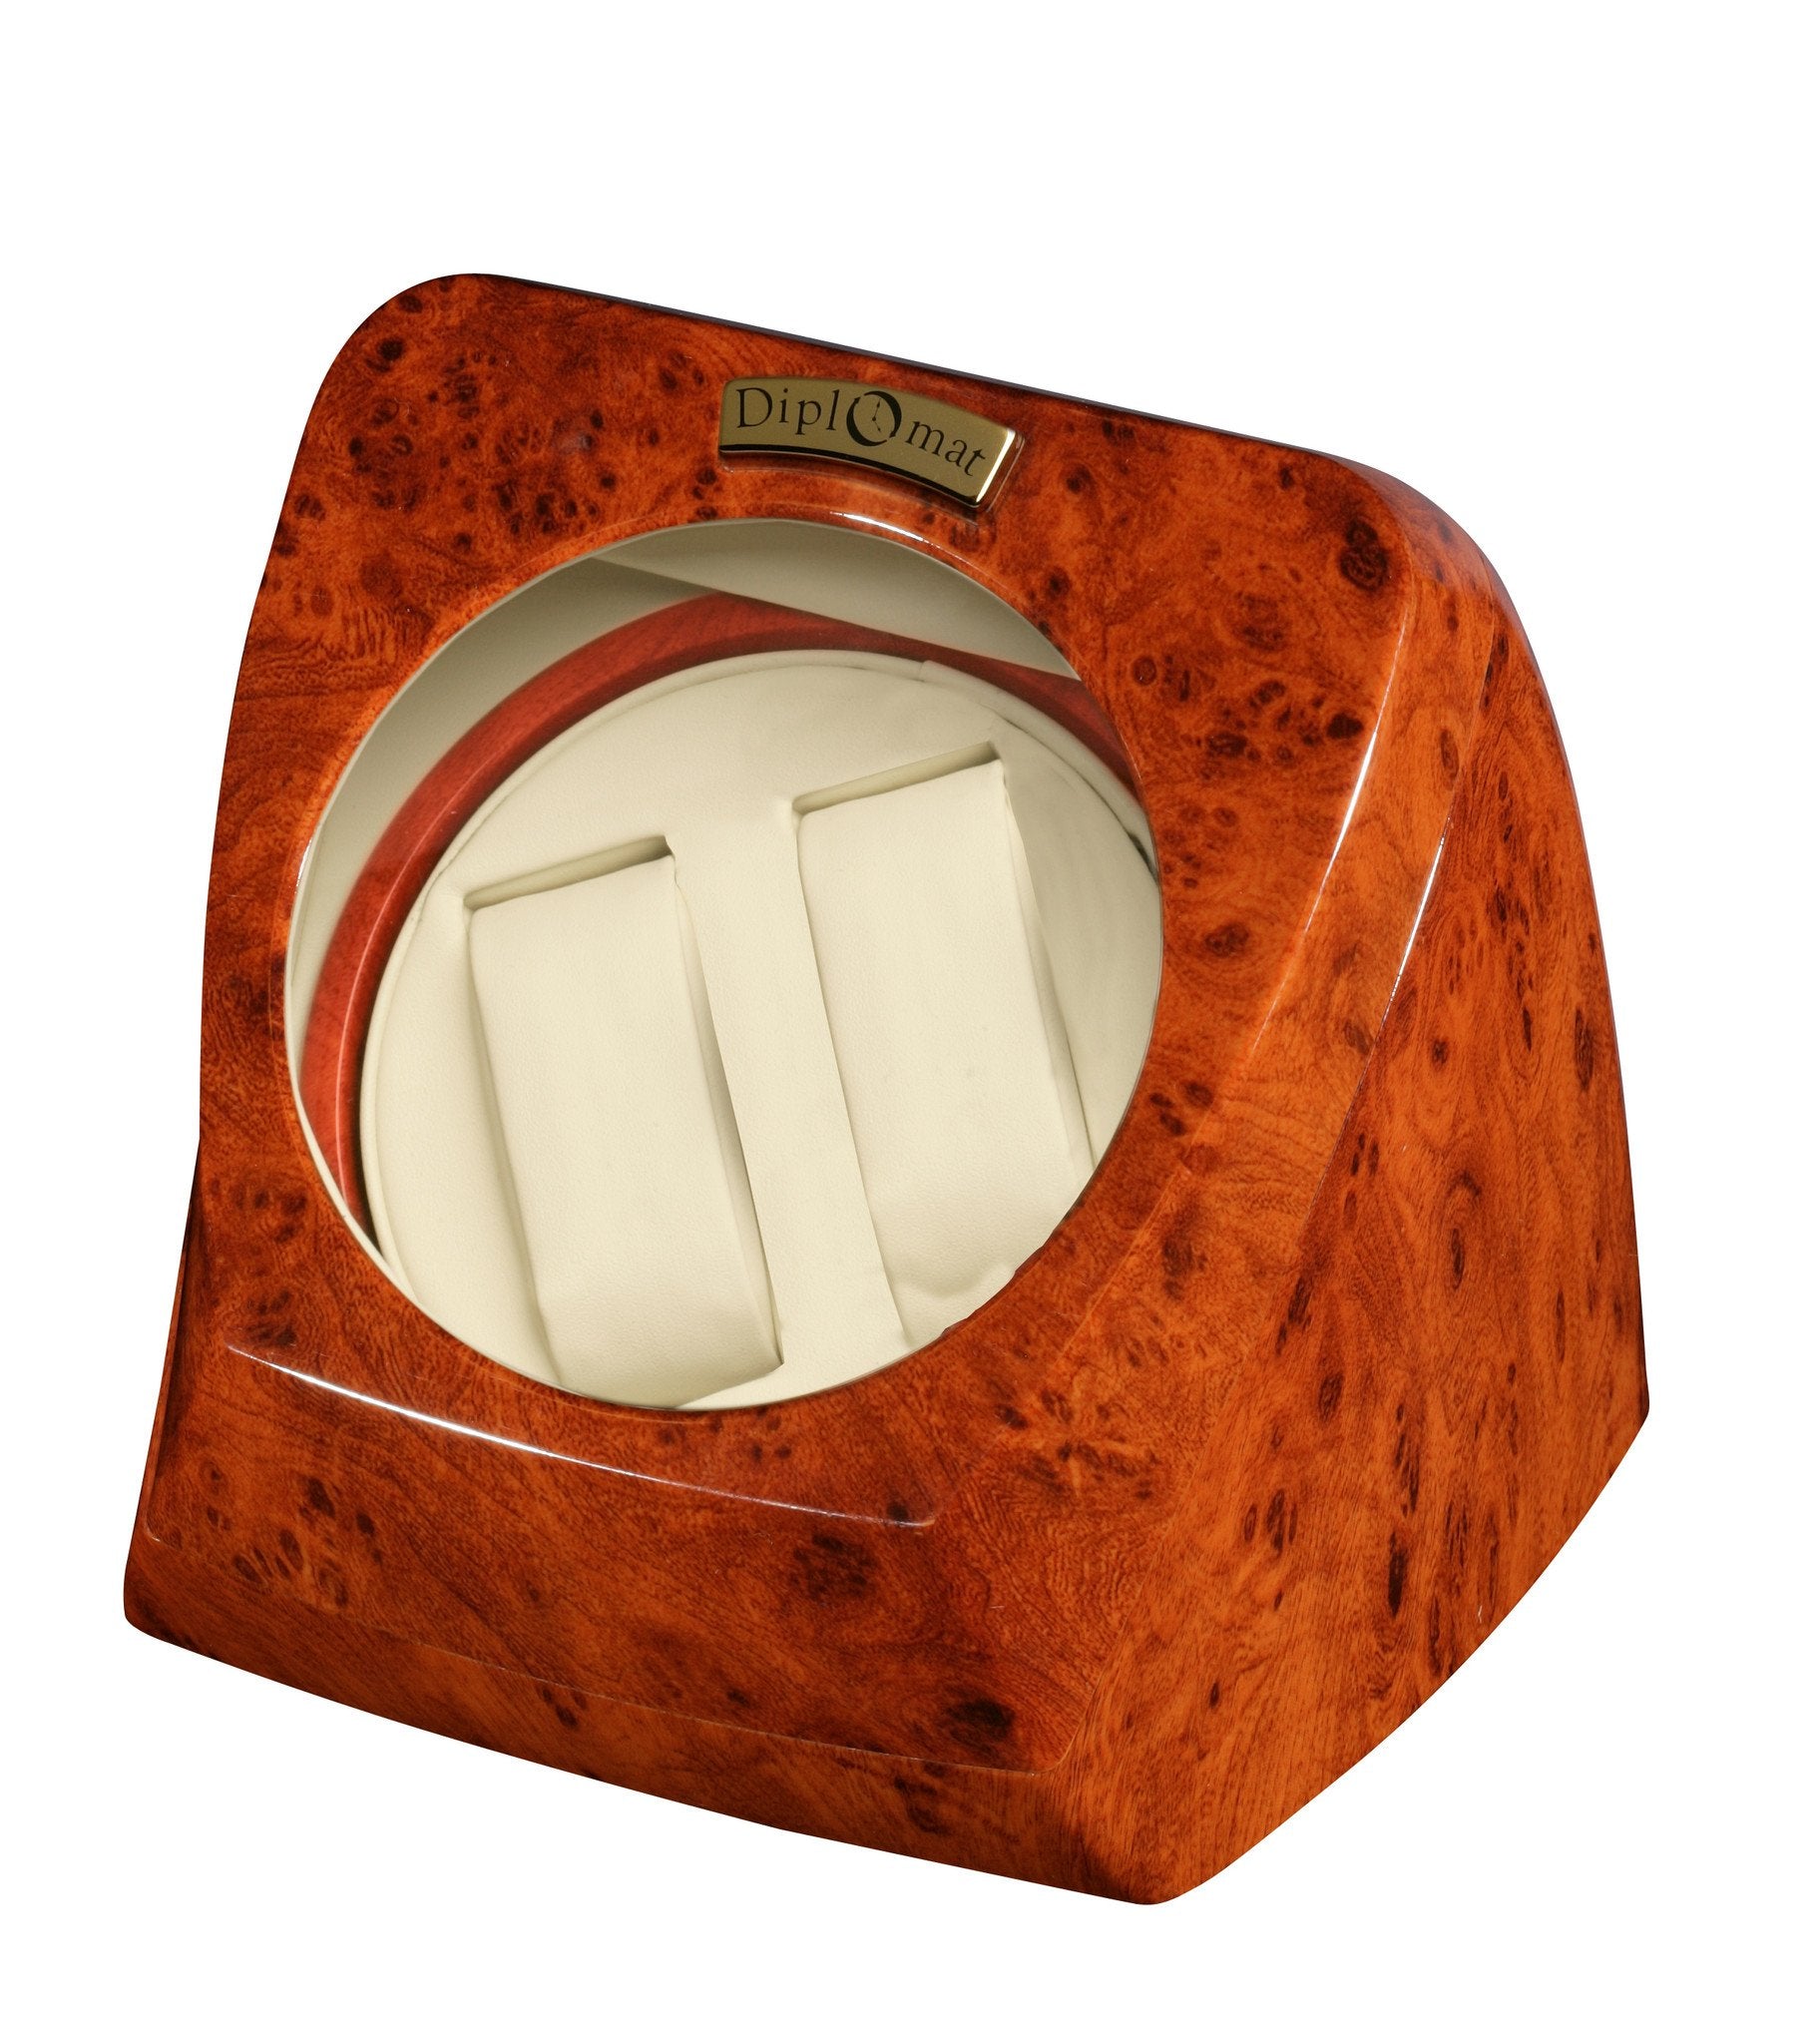 Diplomat "Economy" Compact Double Watch Winder